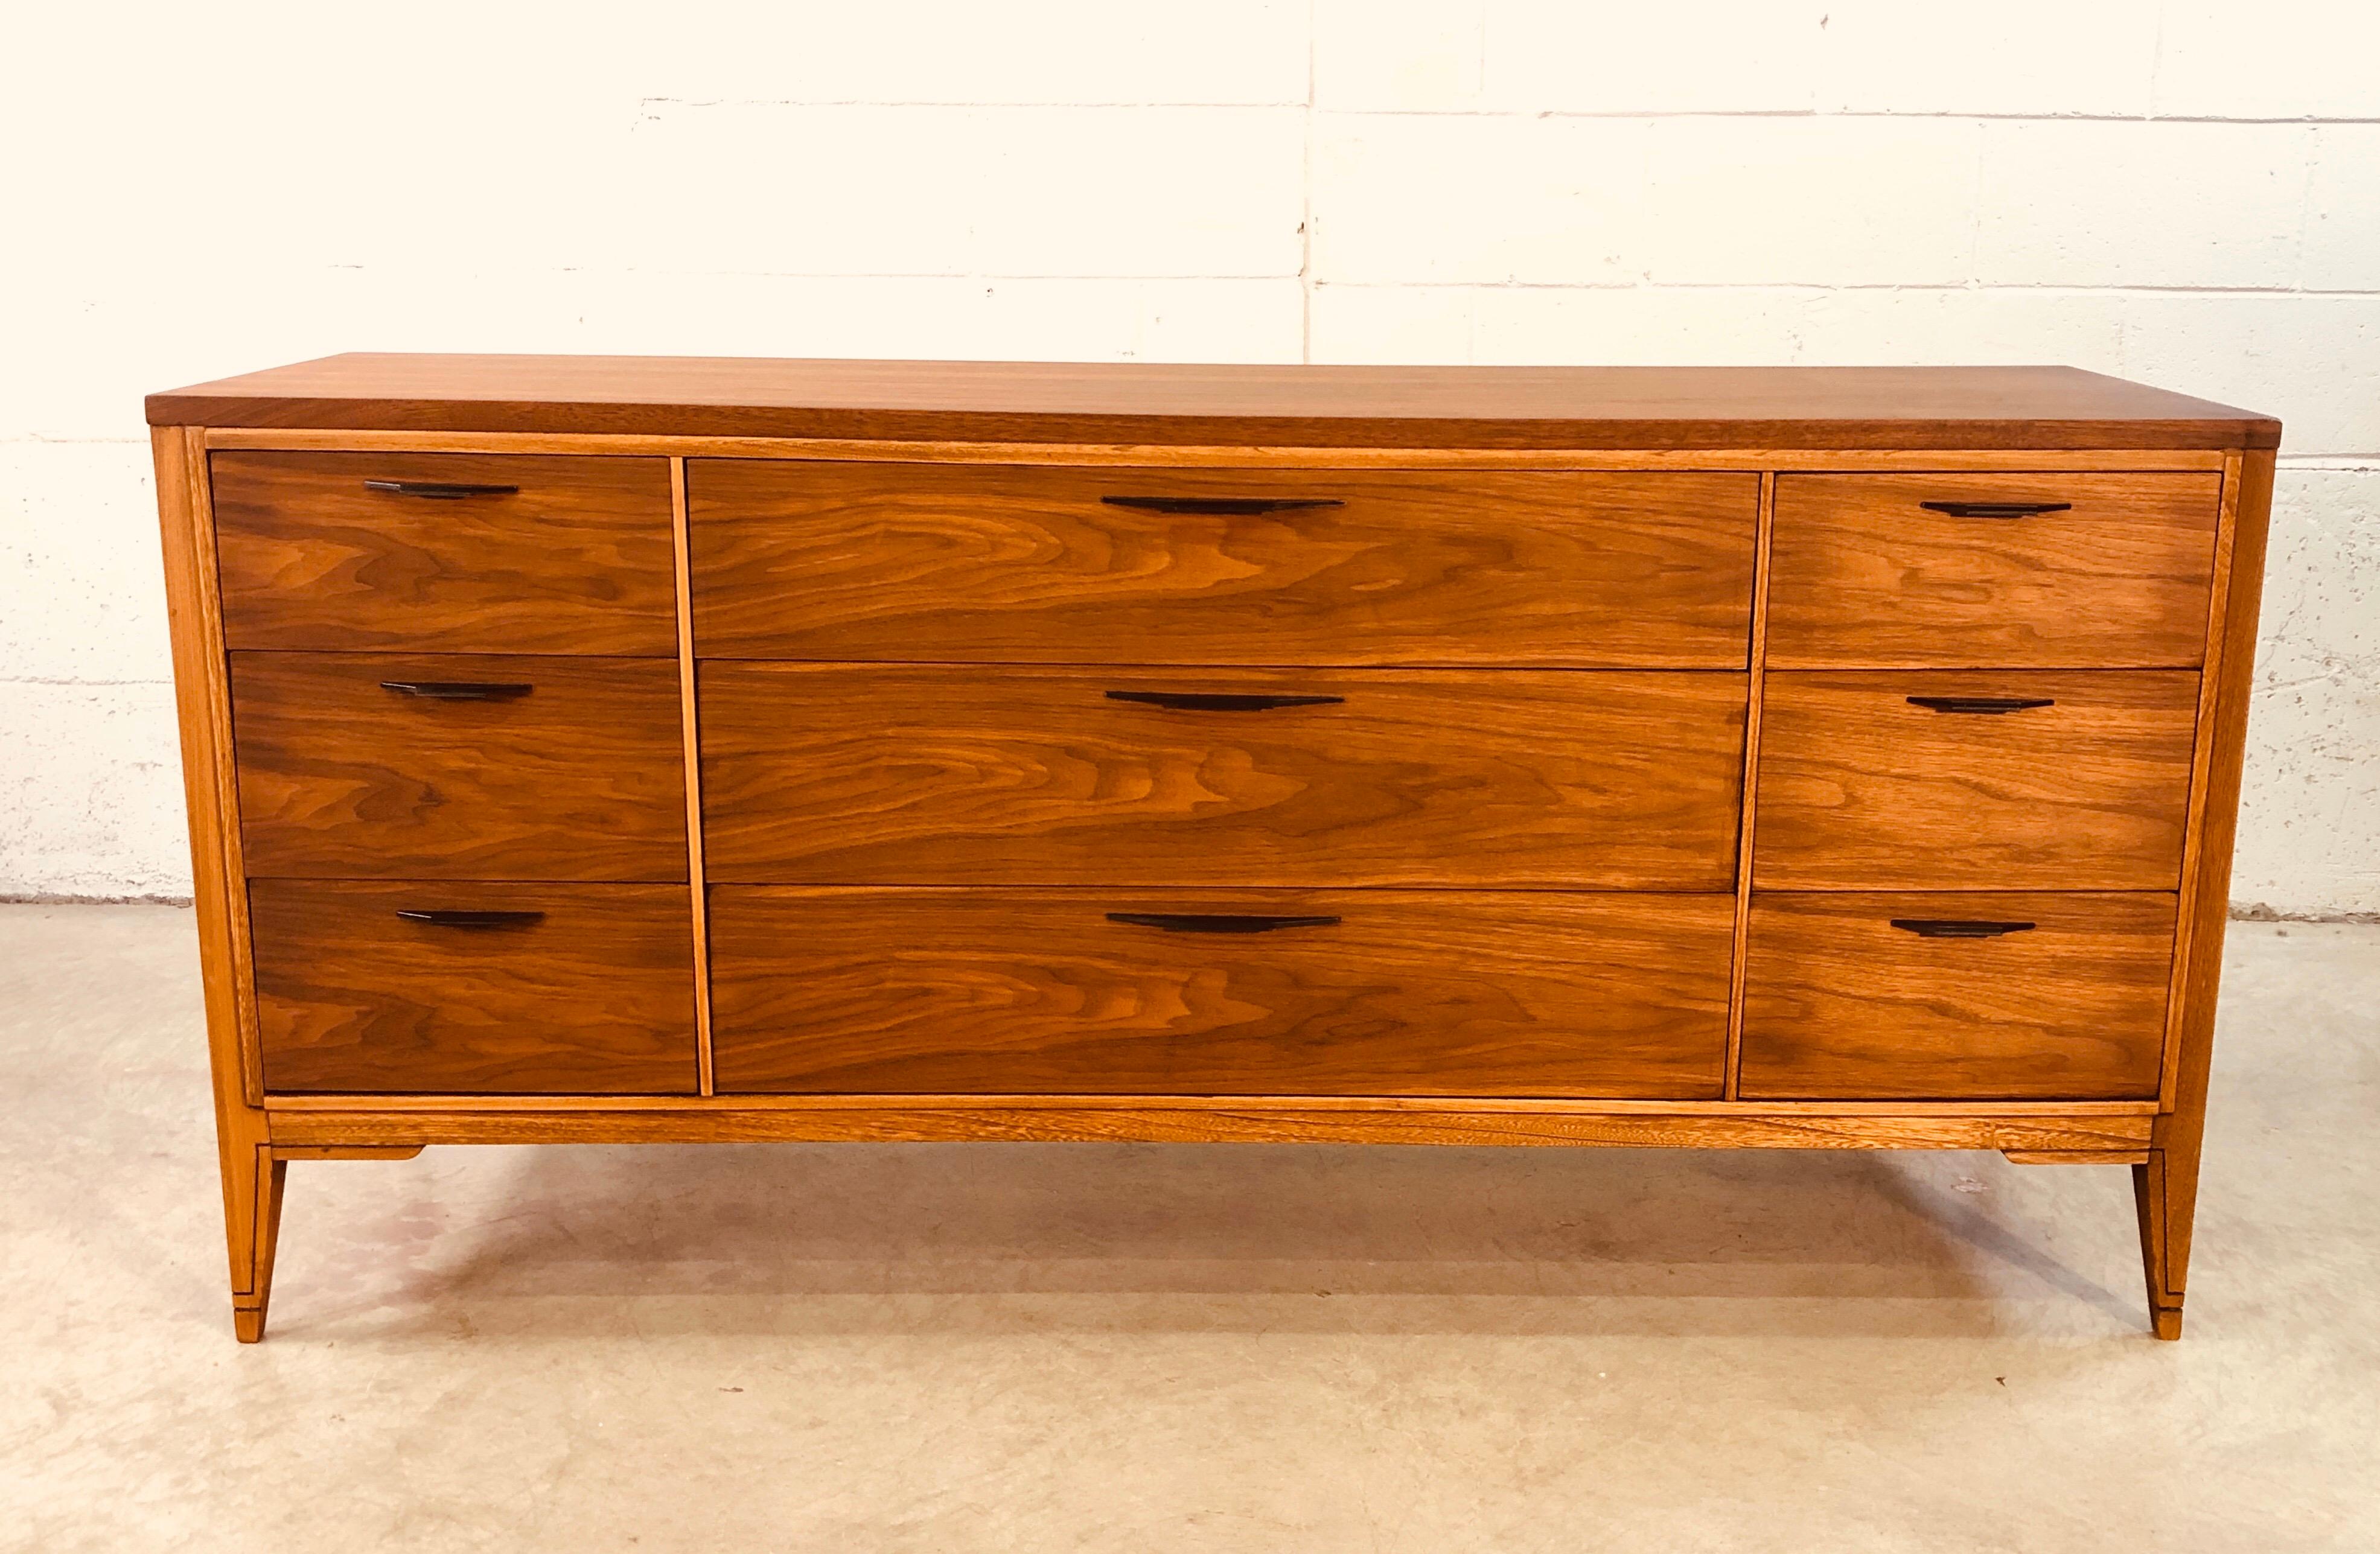 Vintage 1960s low walnut and elm wood dresser by Kent Coffey for the Tempo line. The dresser has nine drawers for storage. Three drawers are 4.25” H and six drawers are 5.25” H. Excellent refinished condition.